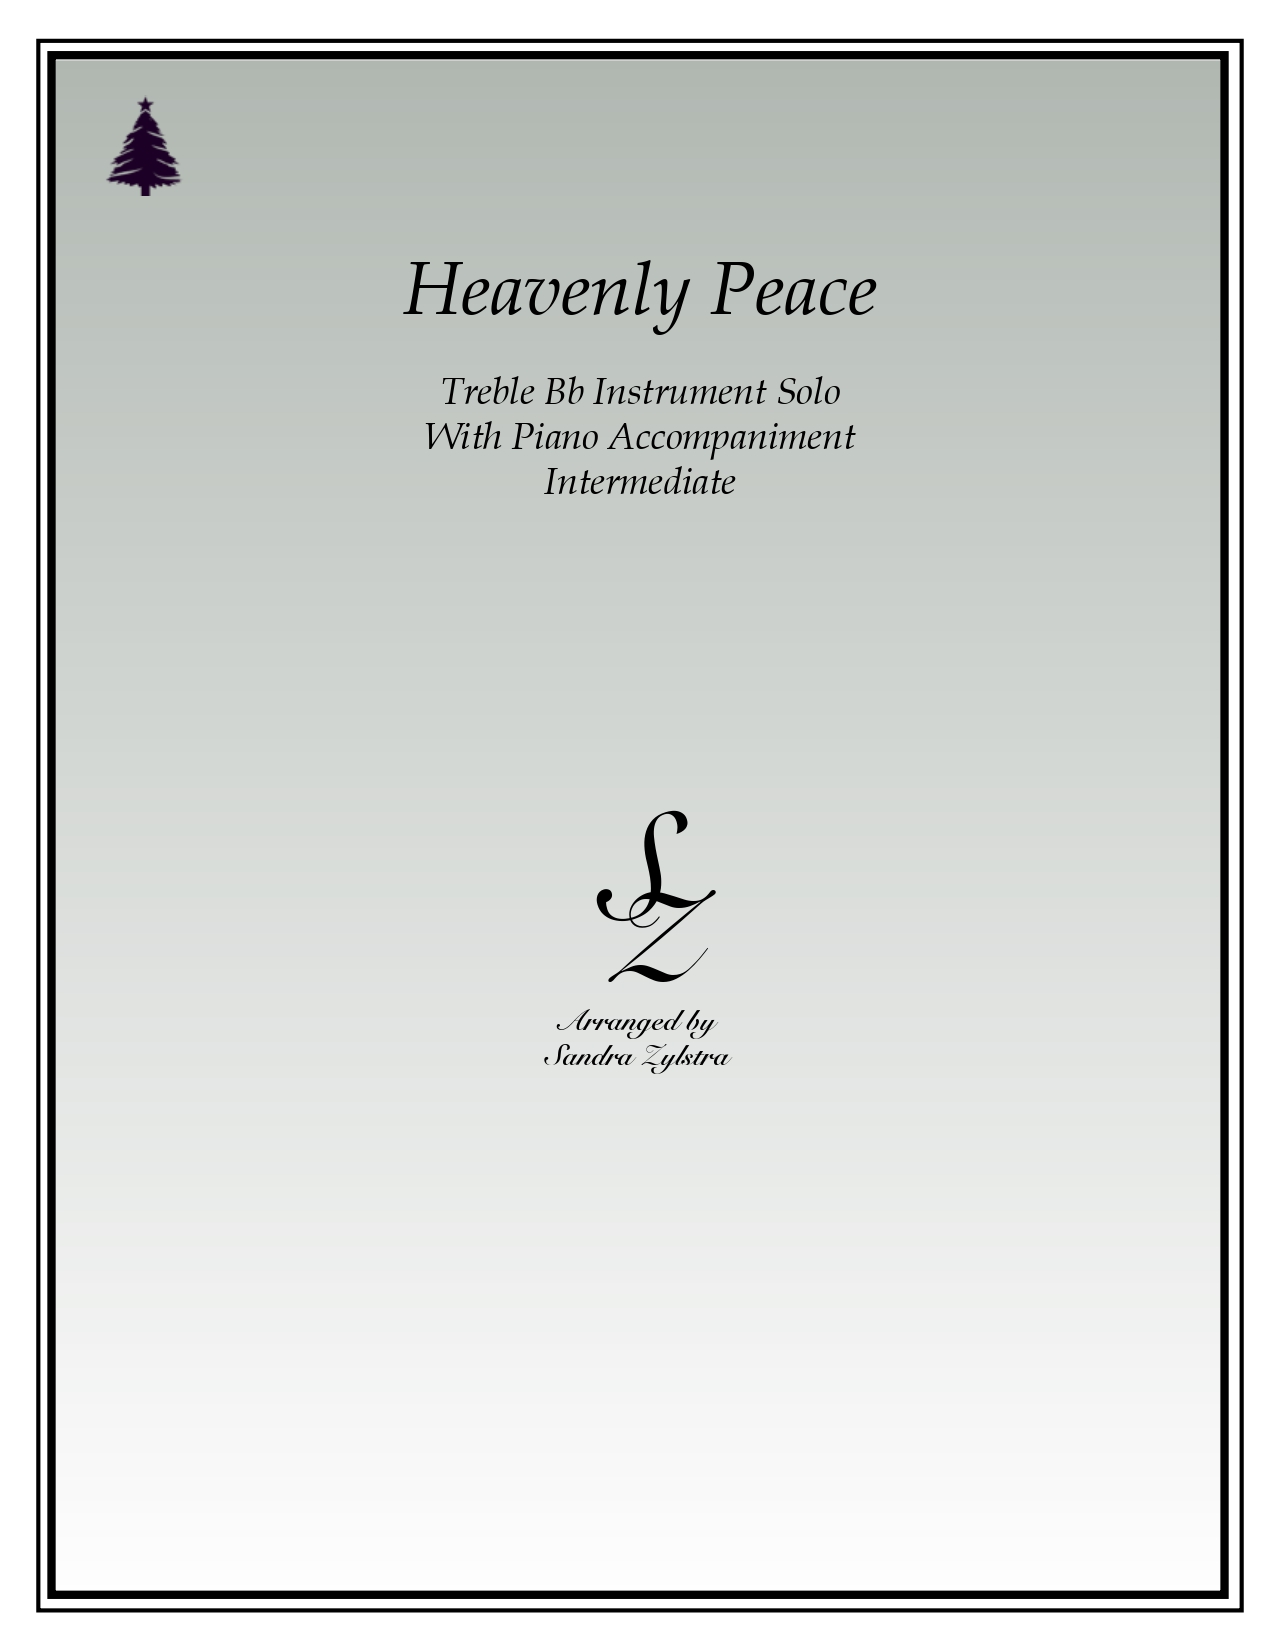 Heavenly Peace Bb instrument solo part cover page 00011